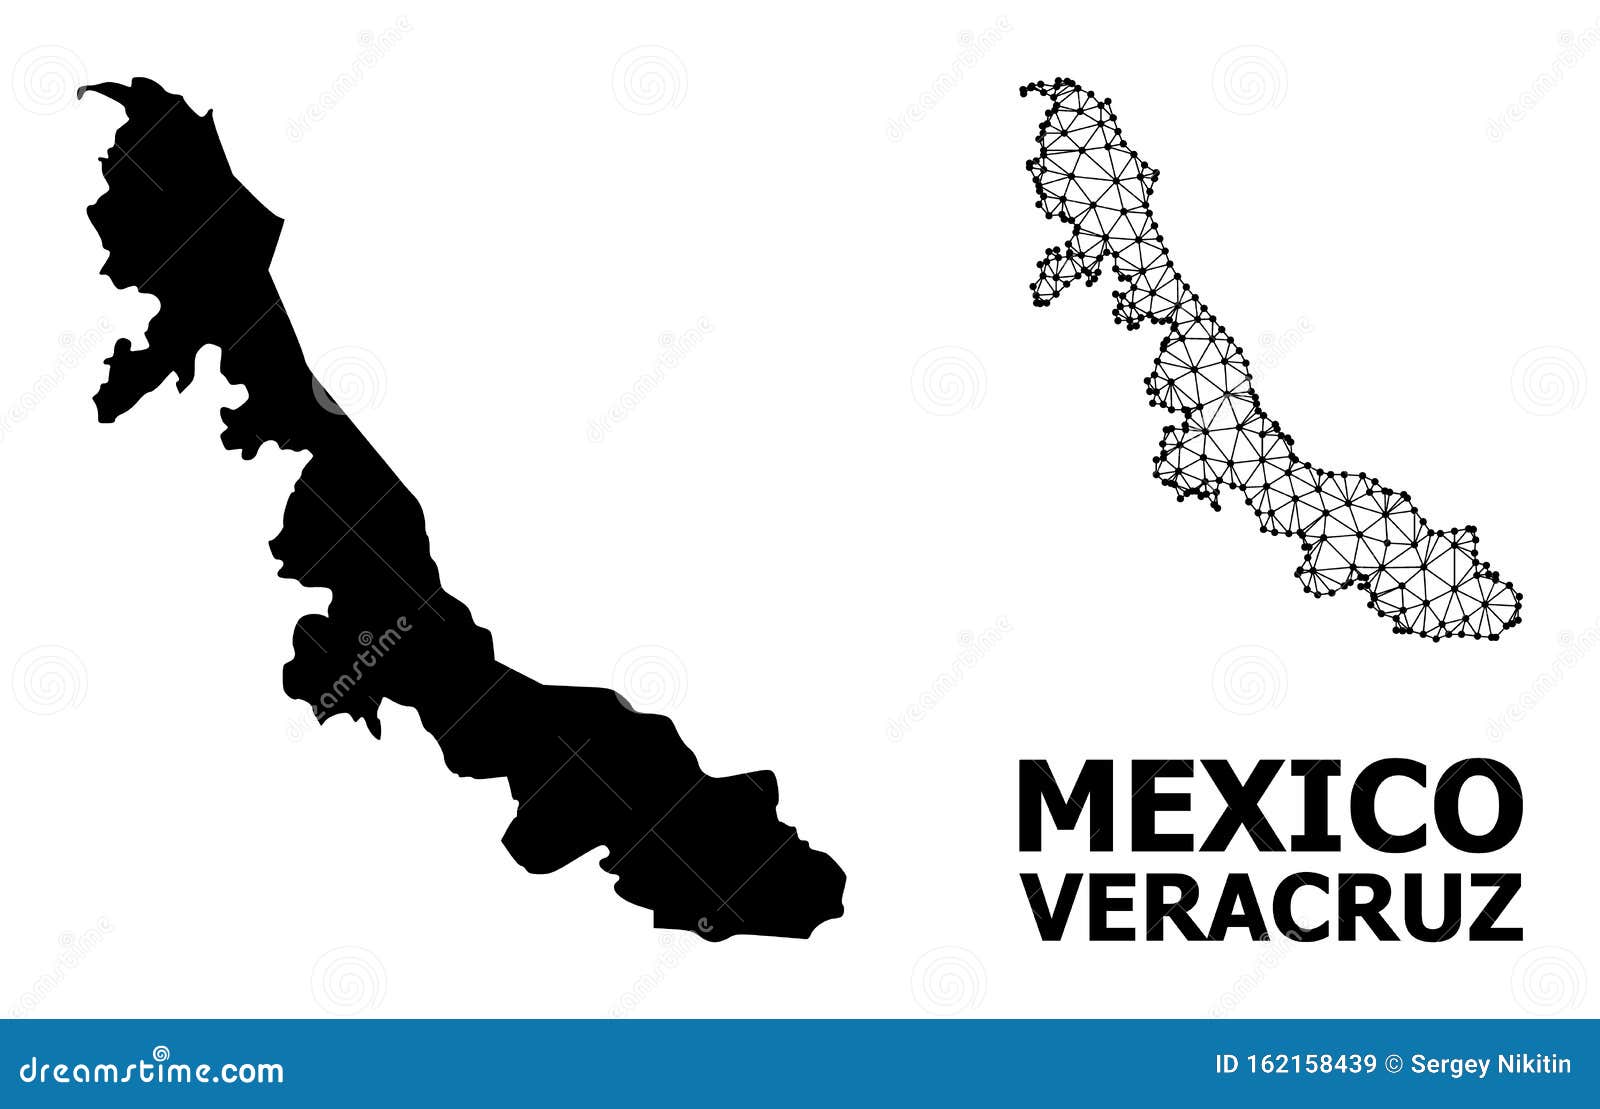 solid and mesh map of veracruz state